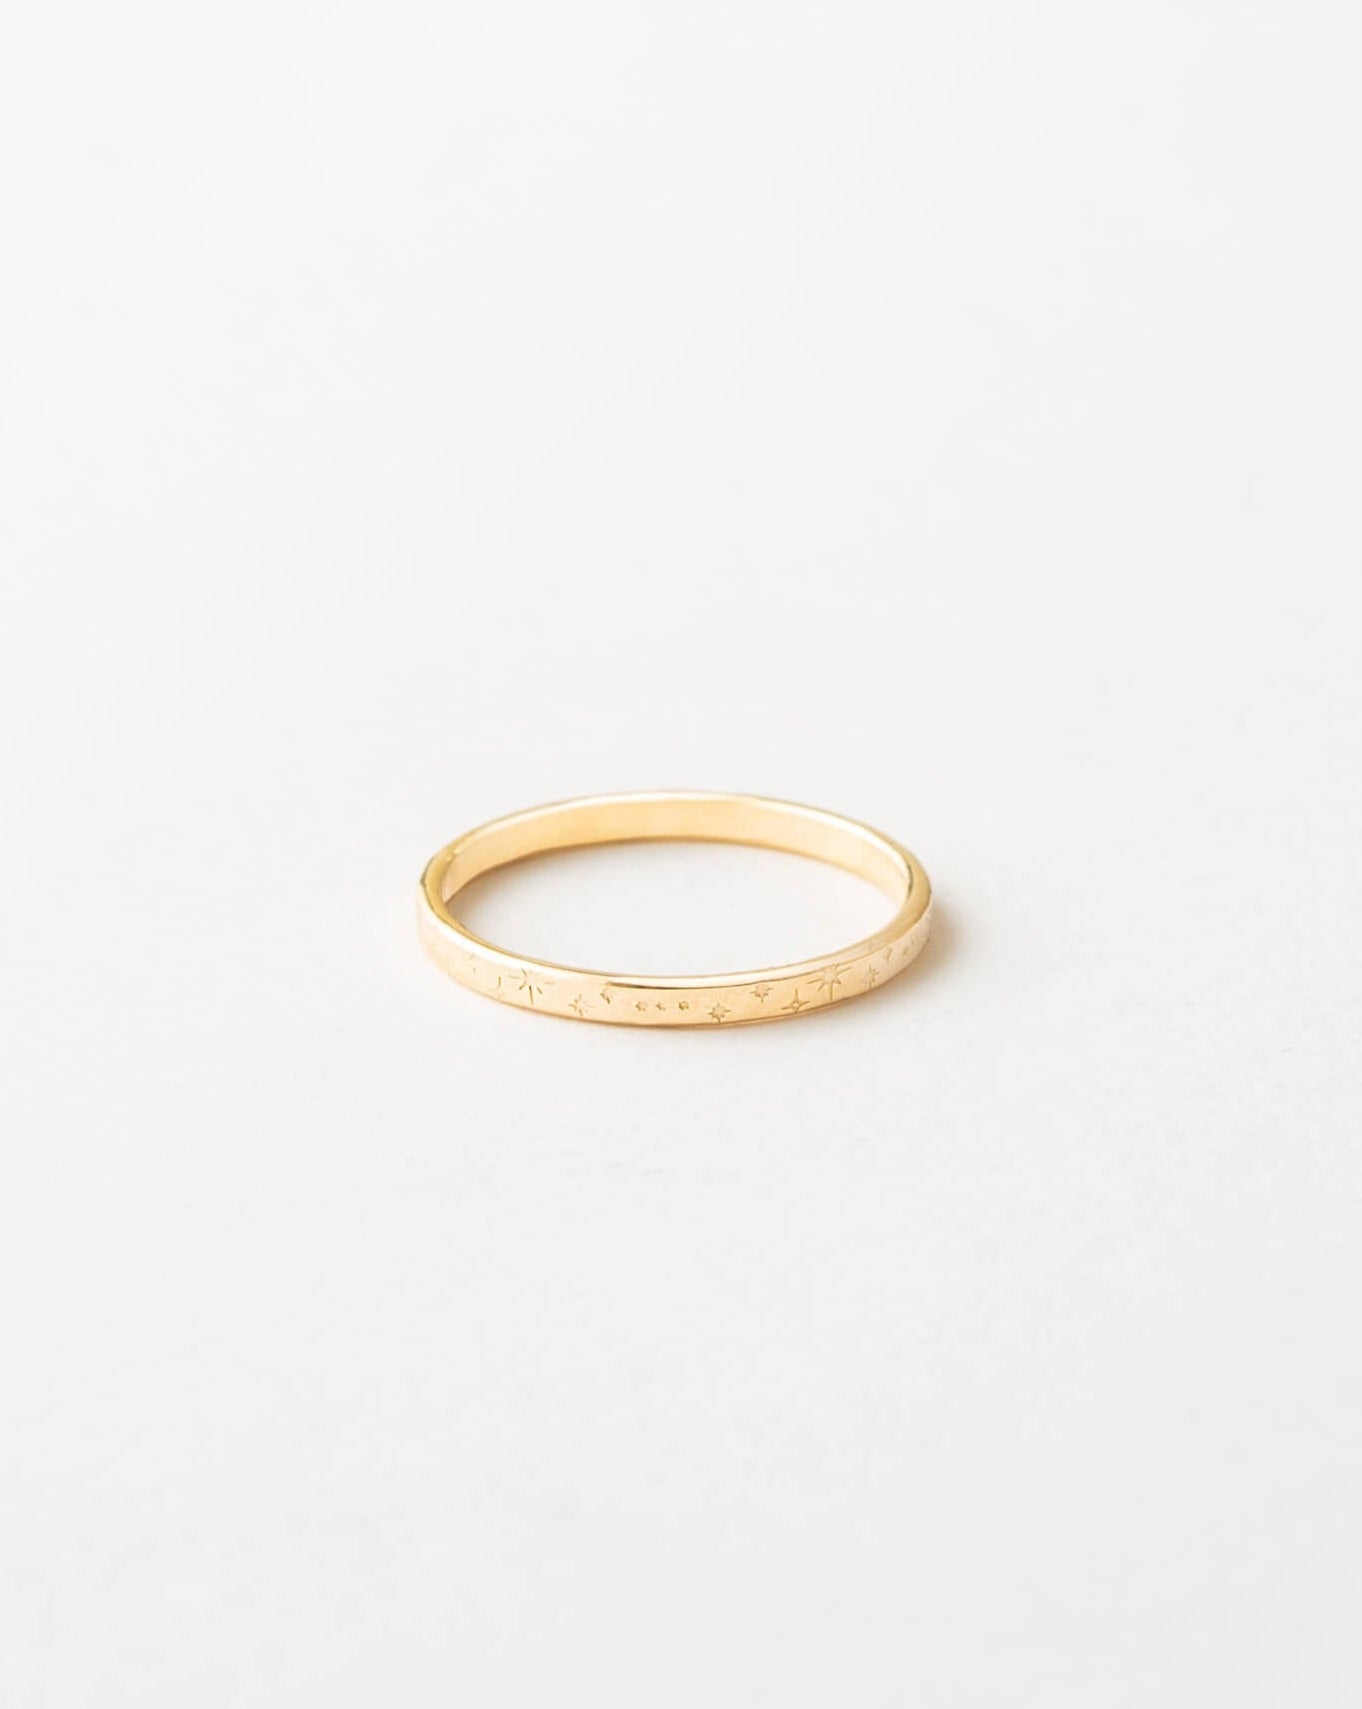 BERING Exchangeable Ring Combination for Women in Rose Gold and Blue with  the Distinctive Twist and Change System, Indus : Amazon.co.uk: Fashion